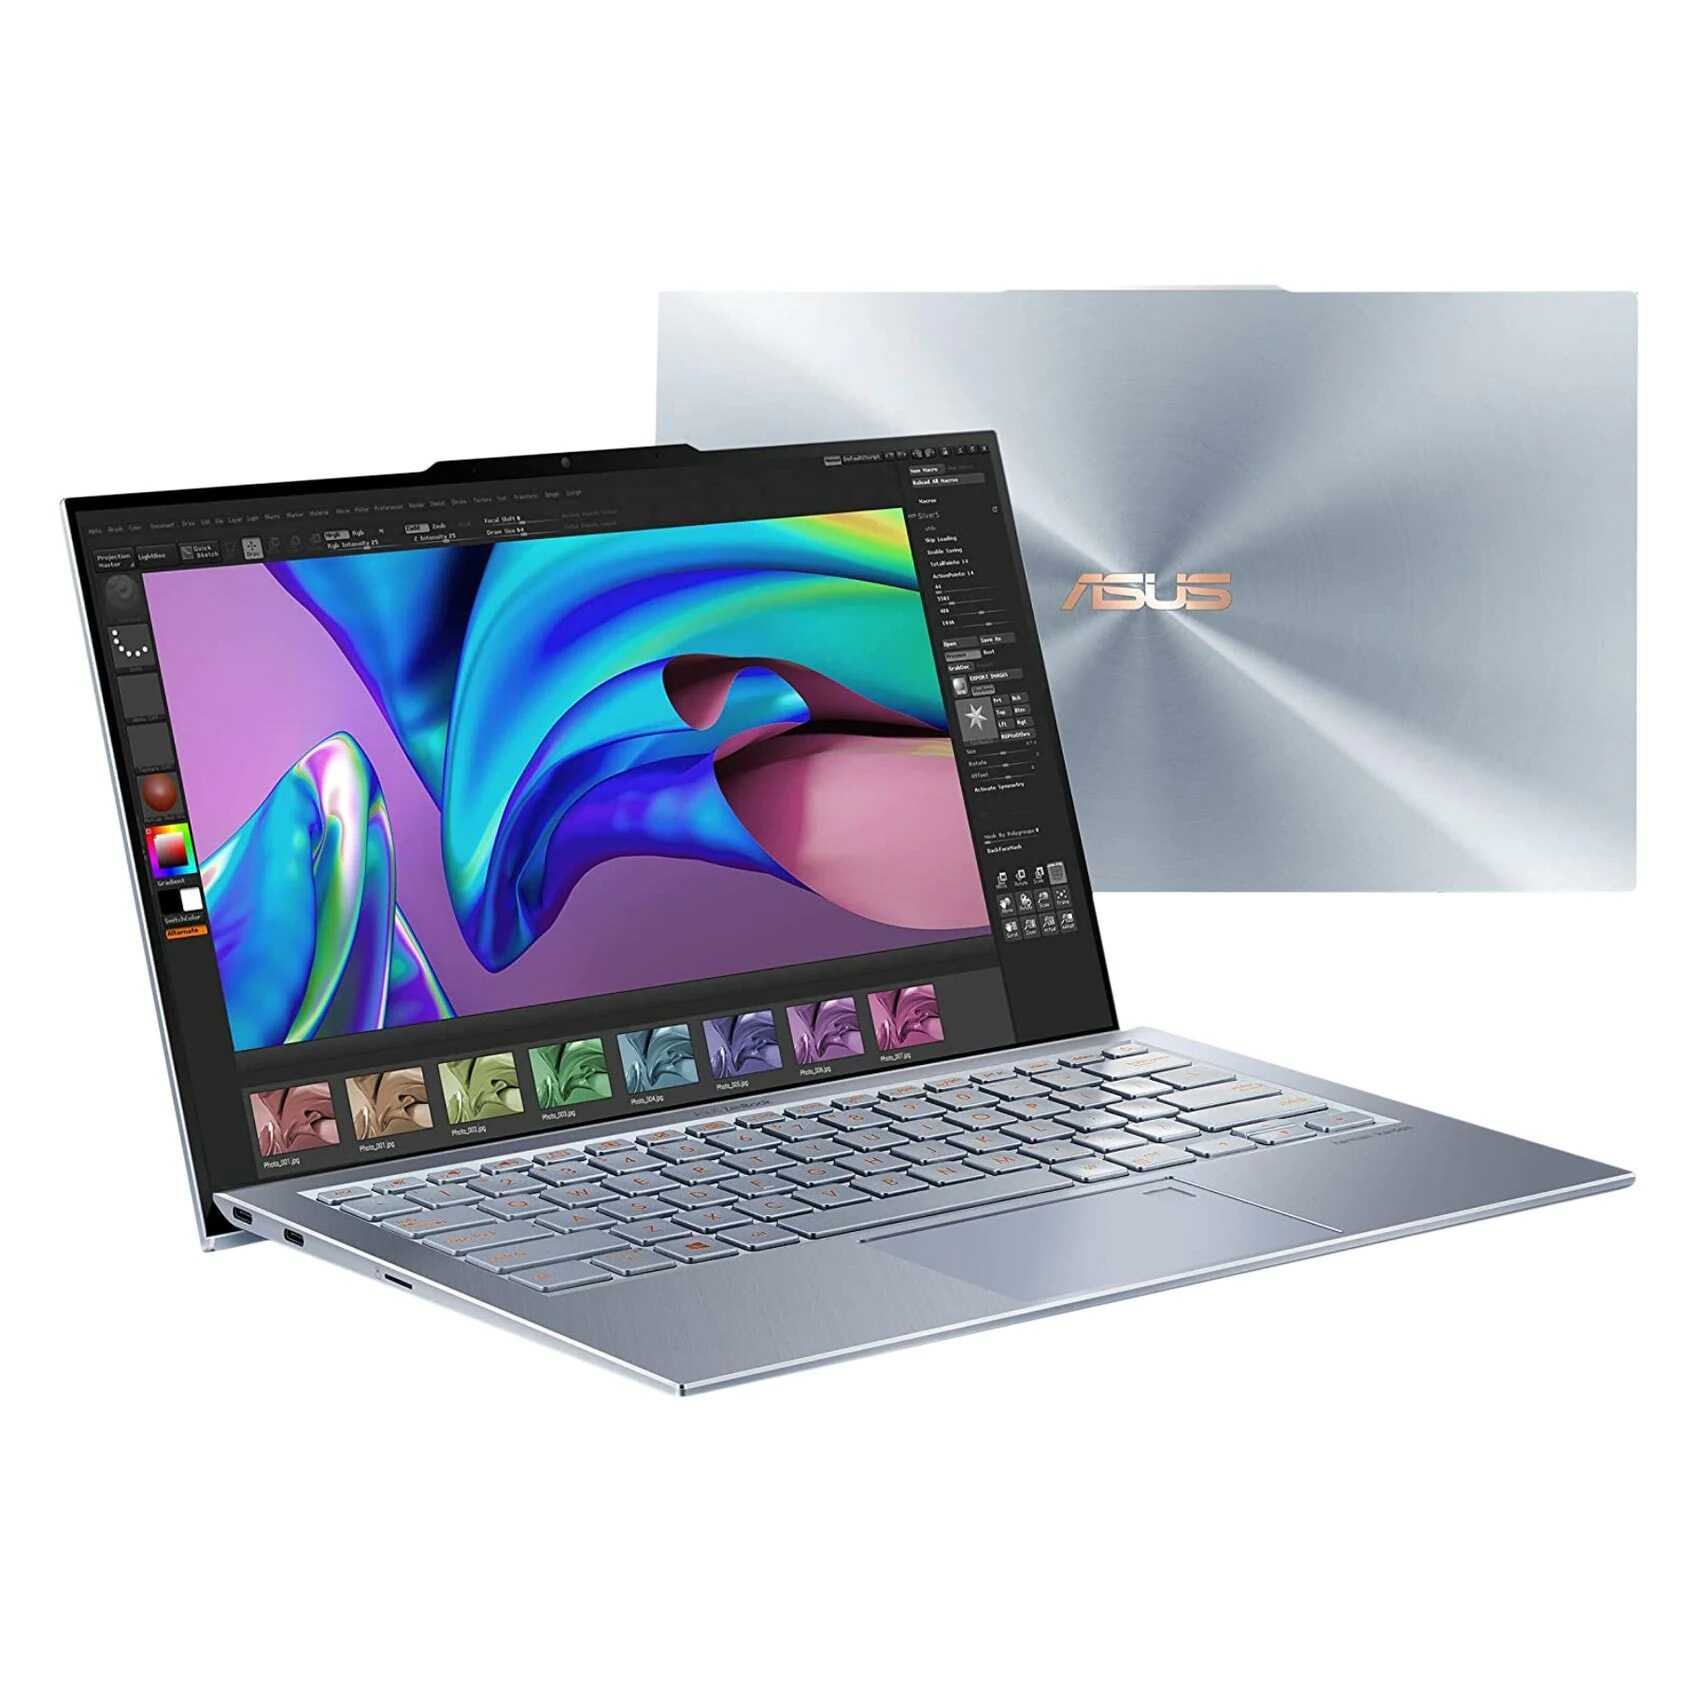 Laptops Promotions offer - in Amman #2073 - 1  image 